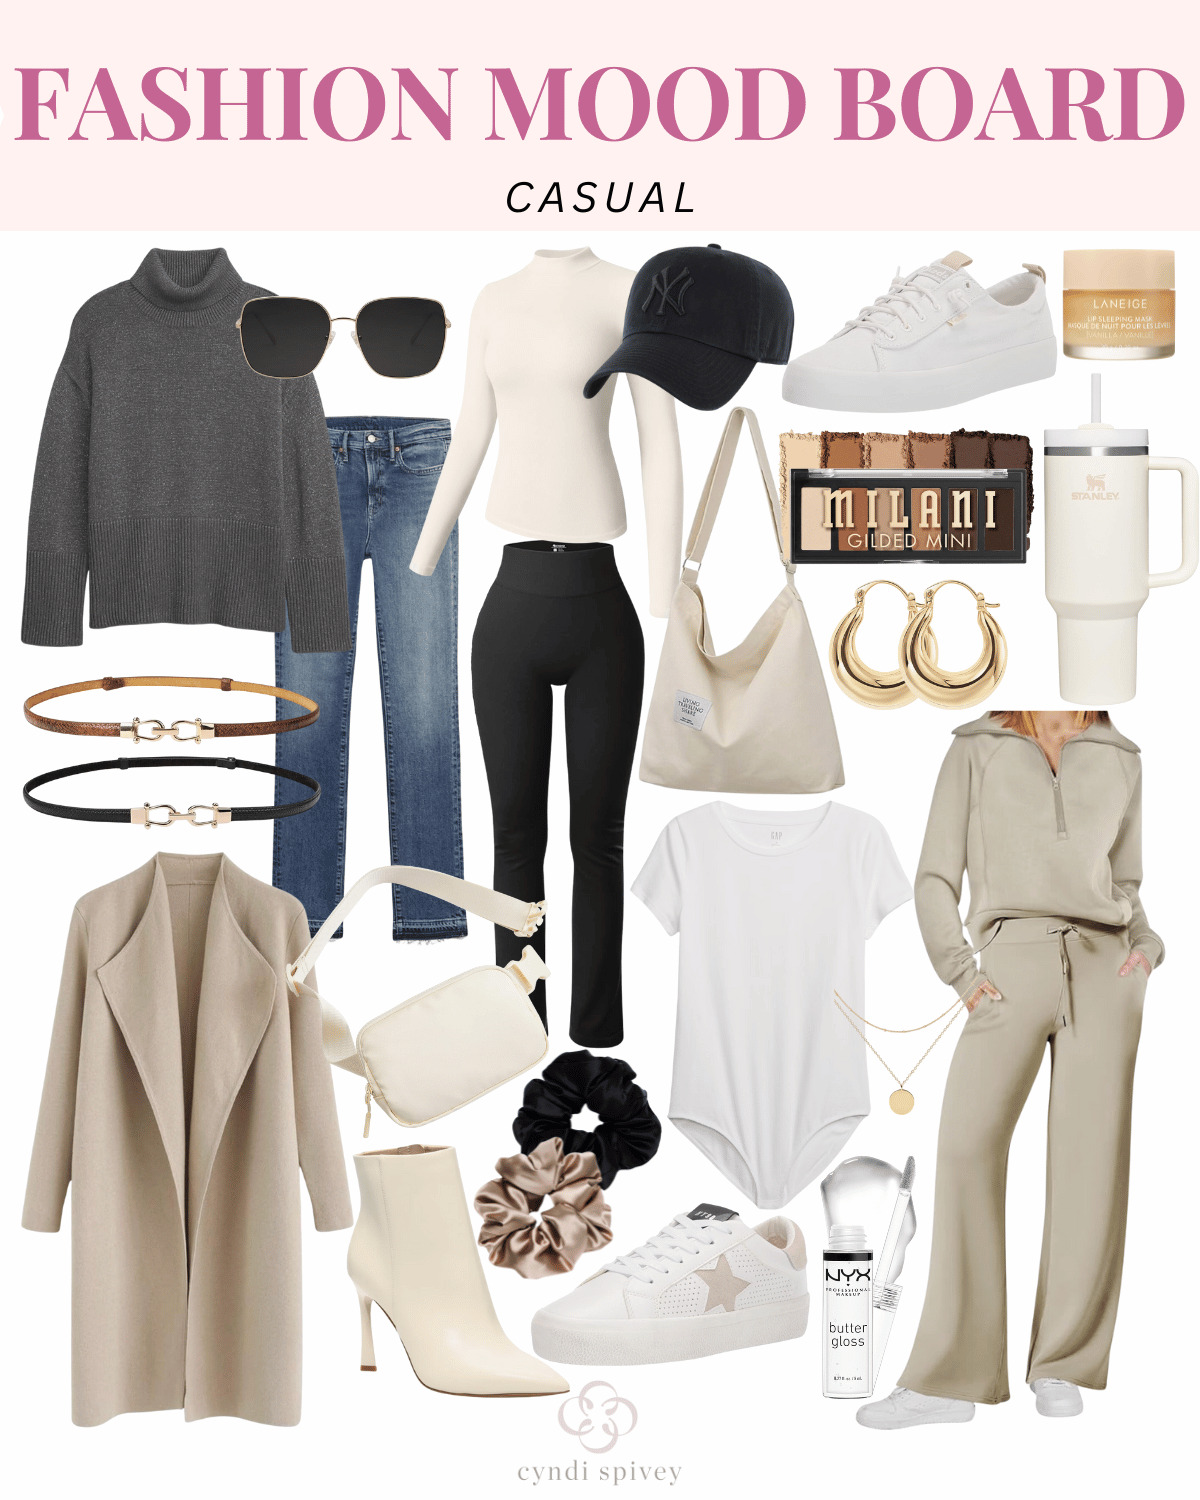 style ideas, how to establish your personal style, preppy style, casual style, classic style, chic style, fashion tips, fashion over 40, fashion blog, fashion blogger, style guide, style tips, understanding your style, create your personal style. fashion mood board, fashion, mood board